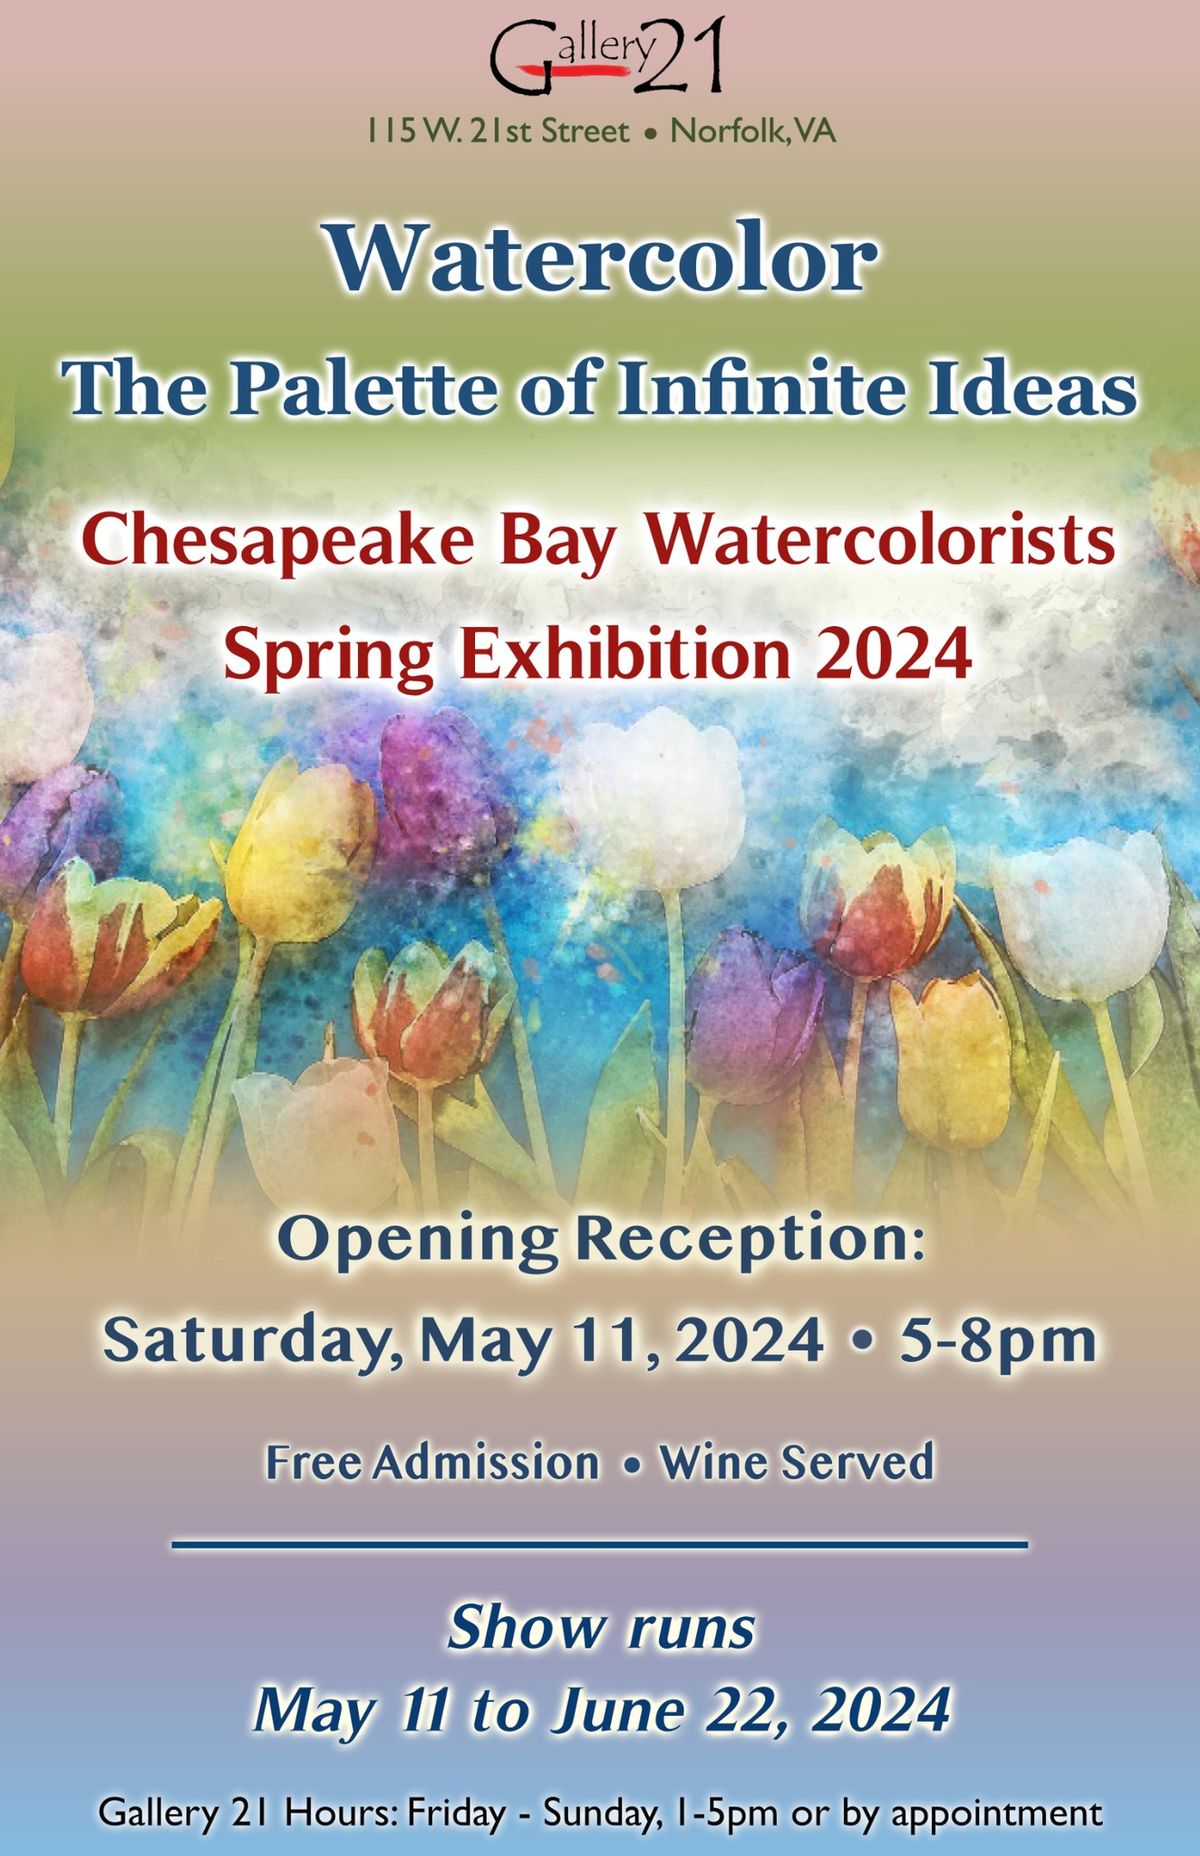 Gallery 21 presents WATERCOLOR, the Palette of Infinite Ideas, art by Chesapeake Bay Watercolorists